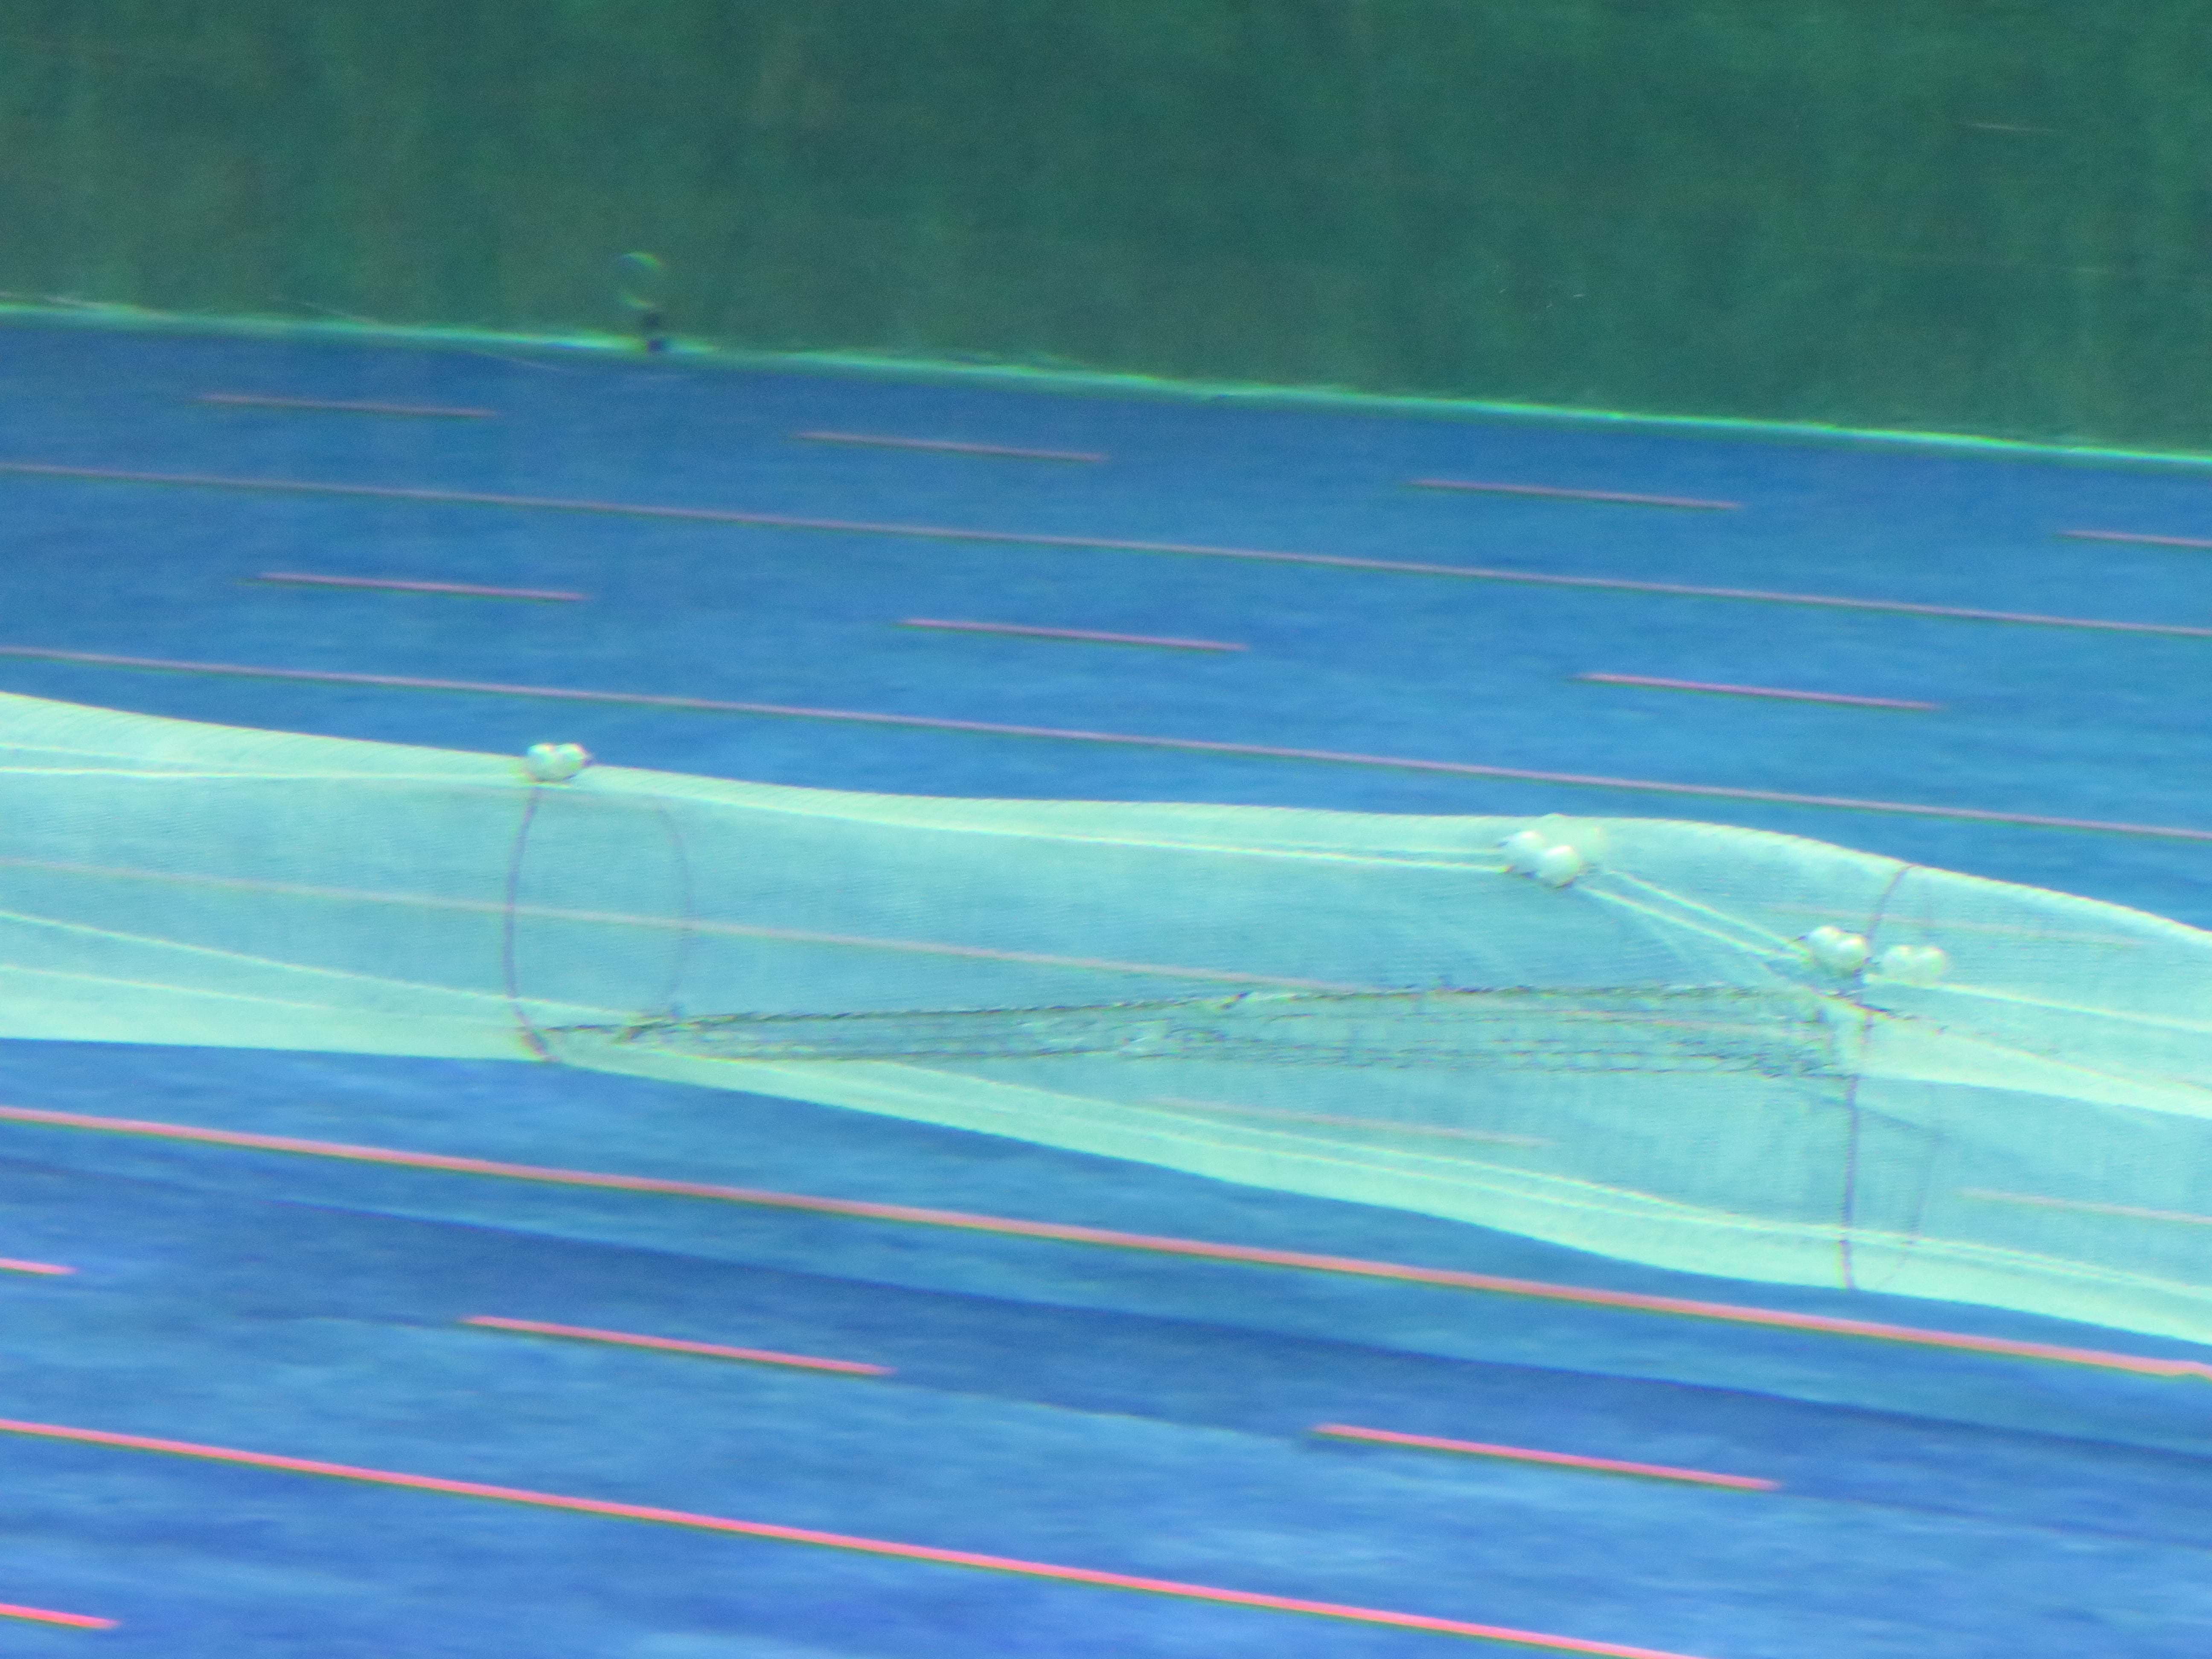 Photo of Amity Net Grid in a flume tank, showing two 8 inch floats on each selvedge as viewed from the top